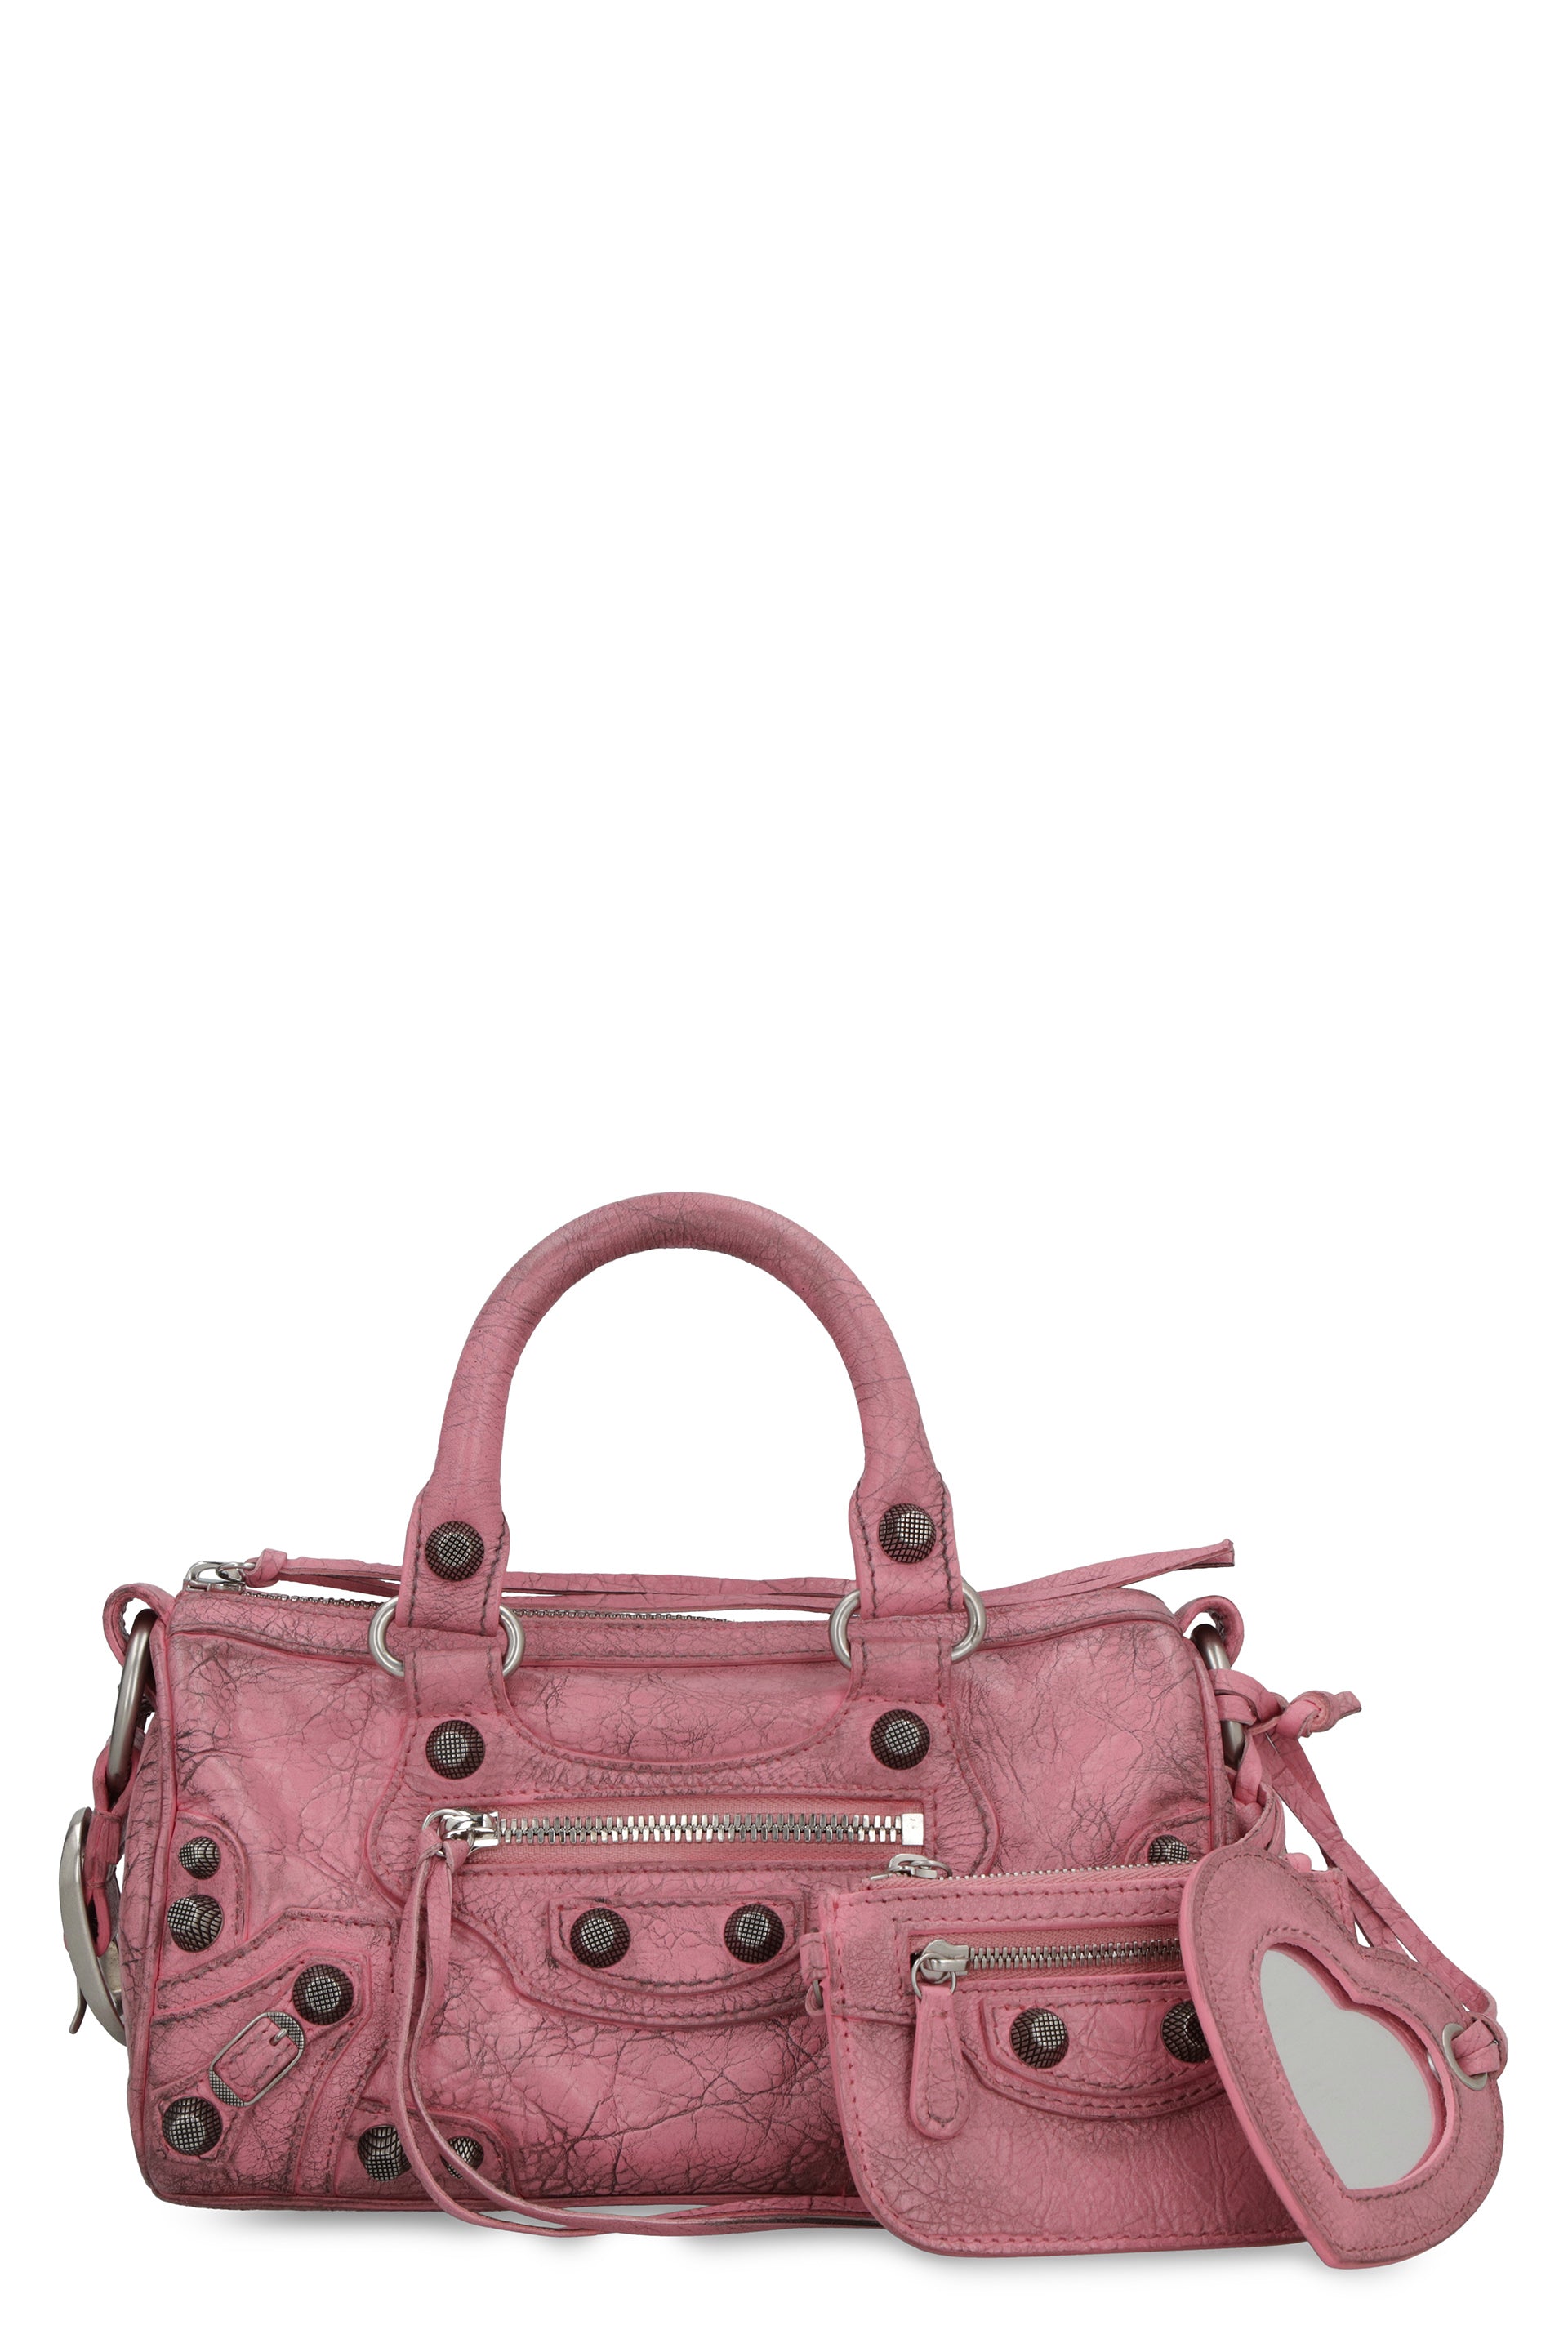 Balenciaga Pink Mini Duffle Shoulder Bag For Women | Vintage Leather And Studs